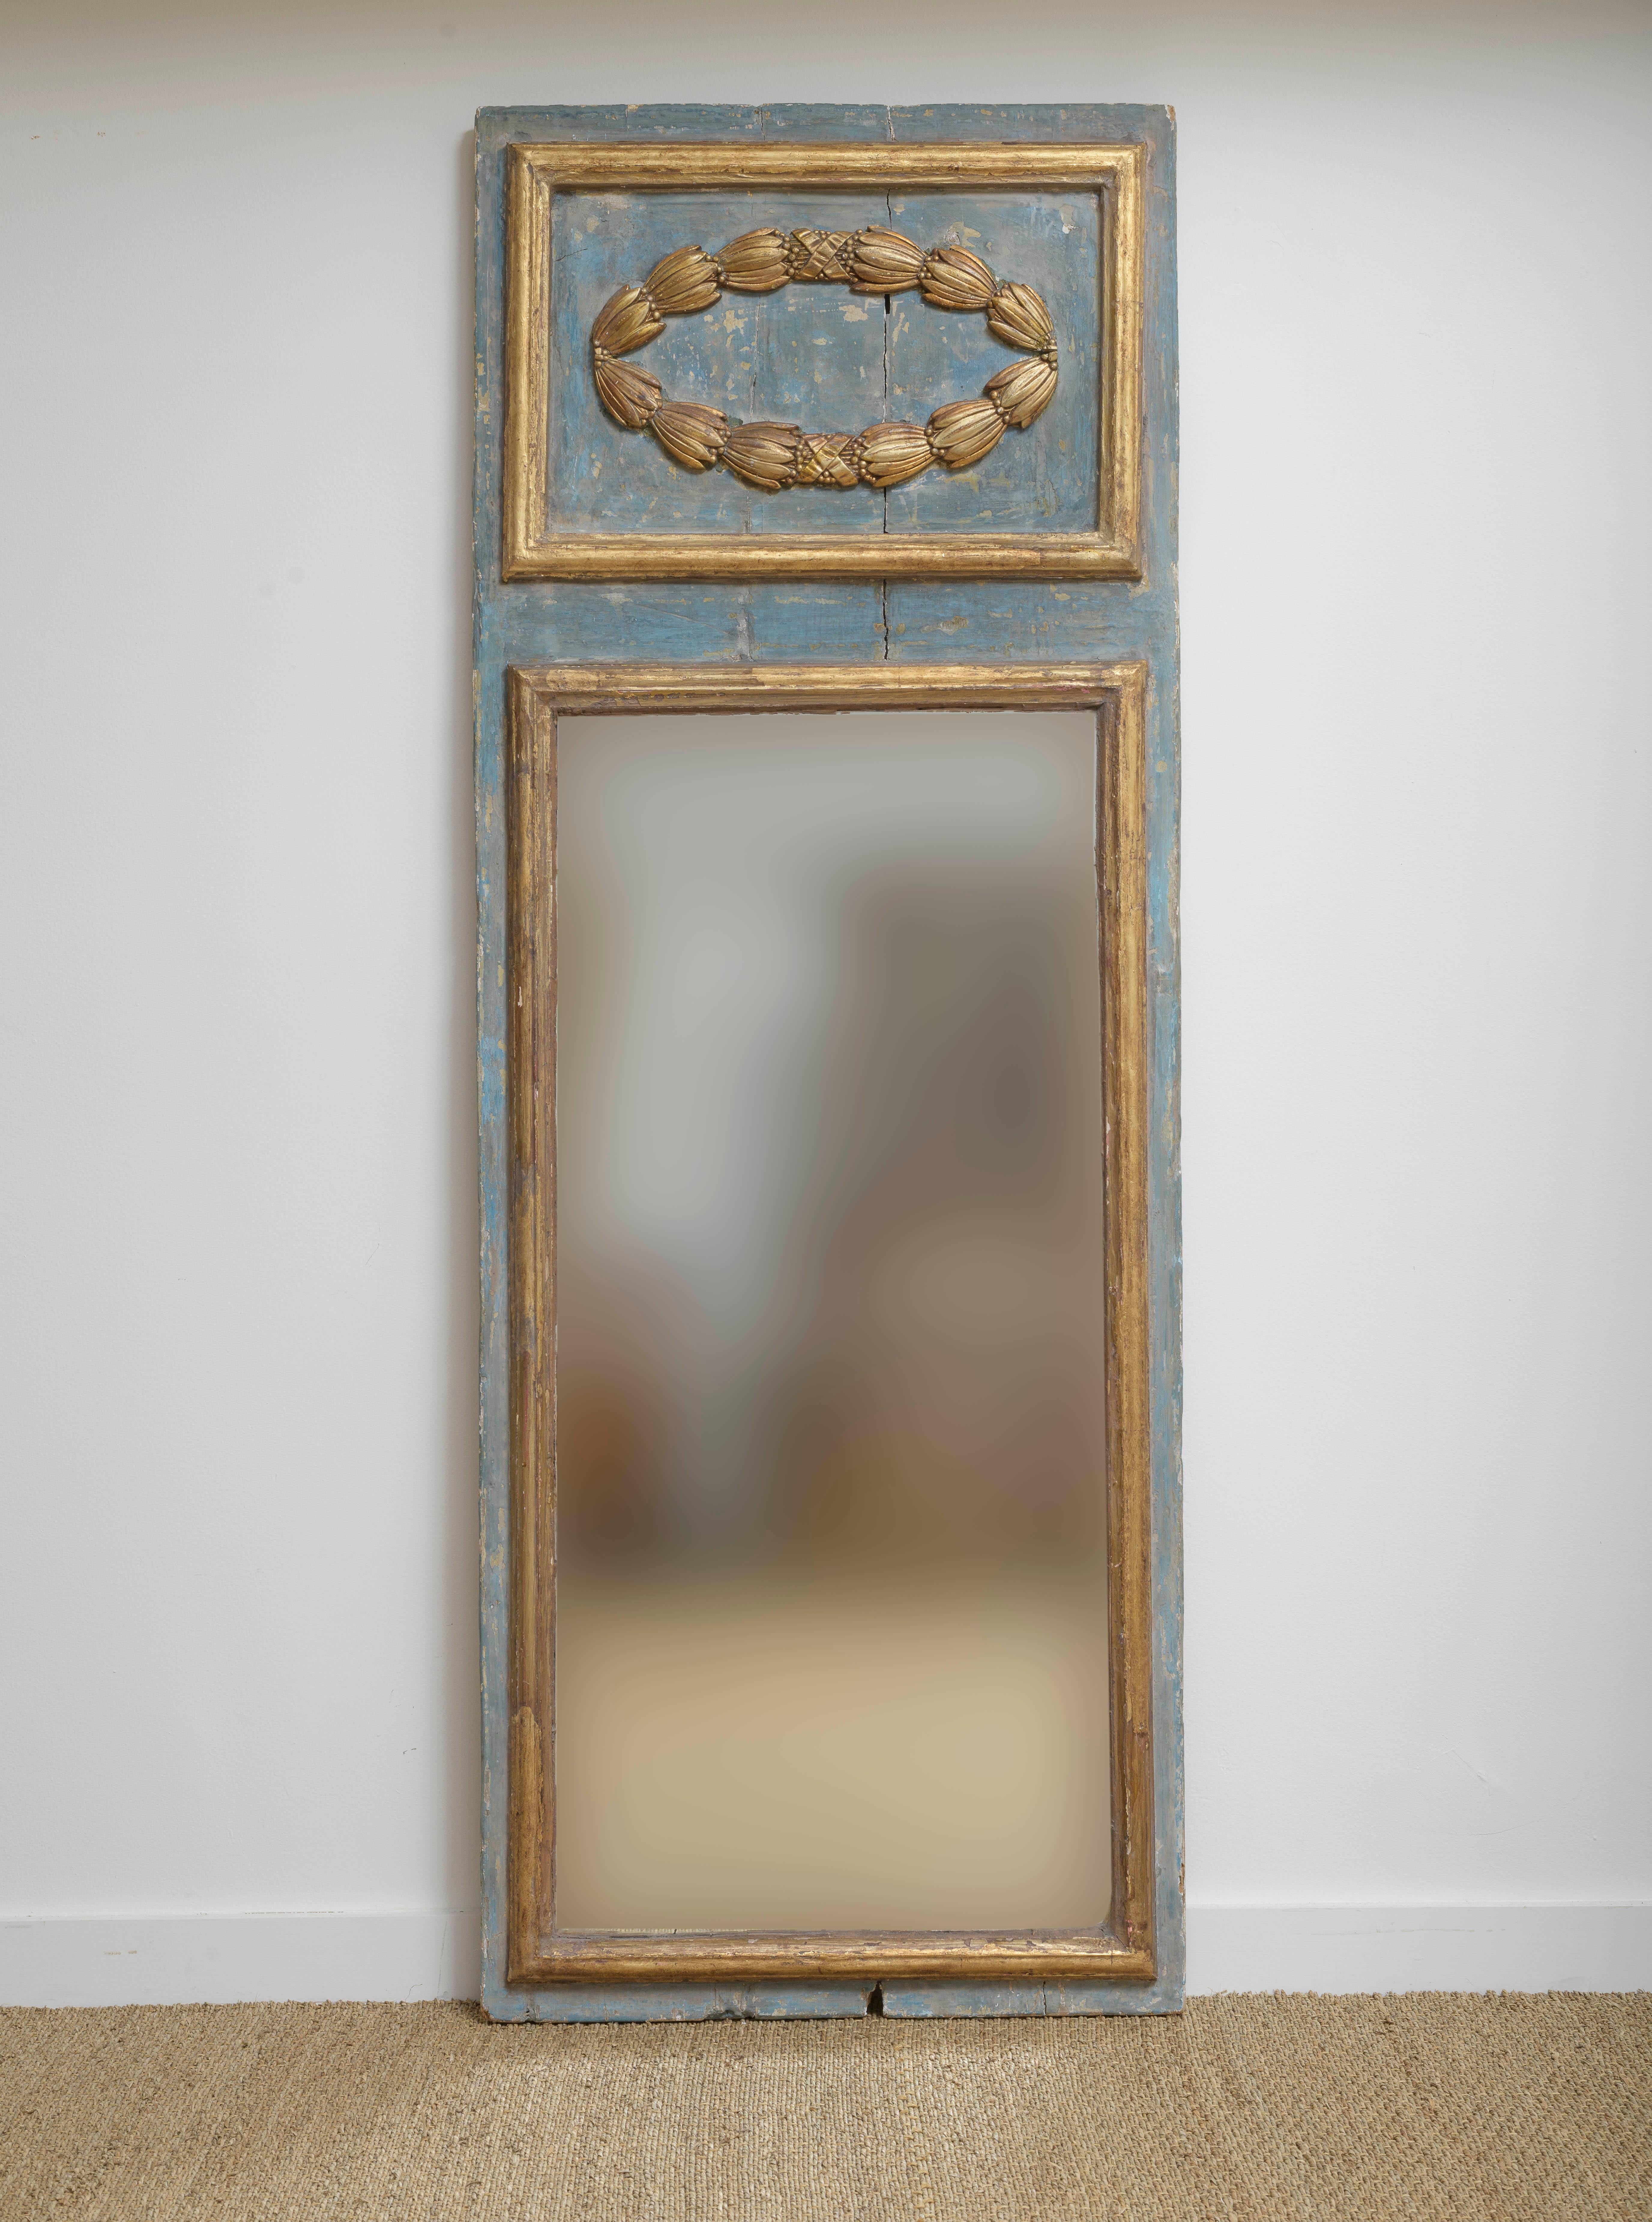 19th Century Italian Louis LXI Style Trumeau Mirror, Original mercury Glass.
Original blue and grey paint and gilding.  Original mercury glass  uniquely done in three parts with horizontal bevel.   